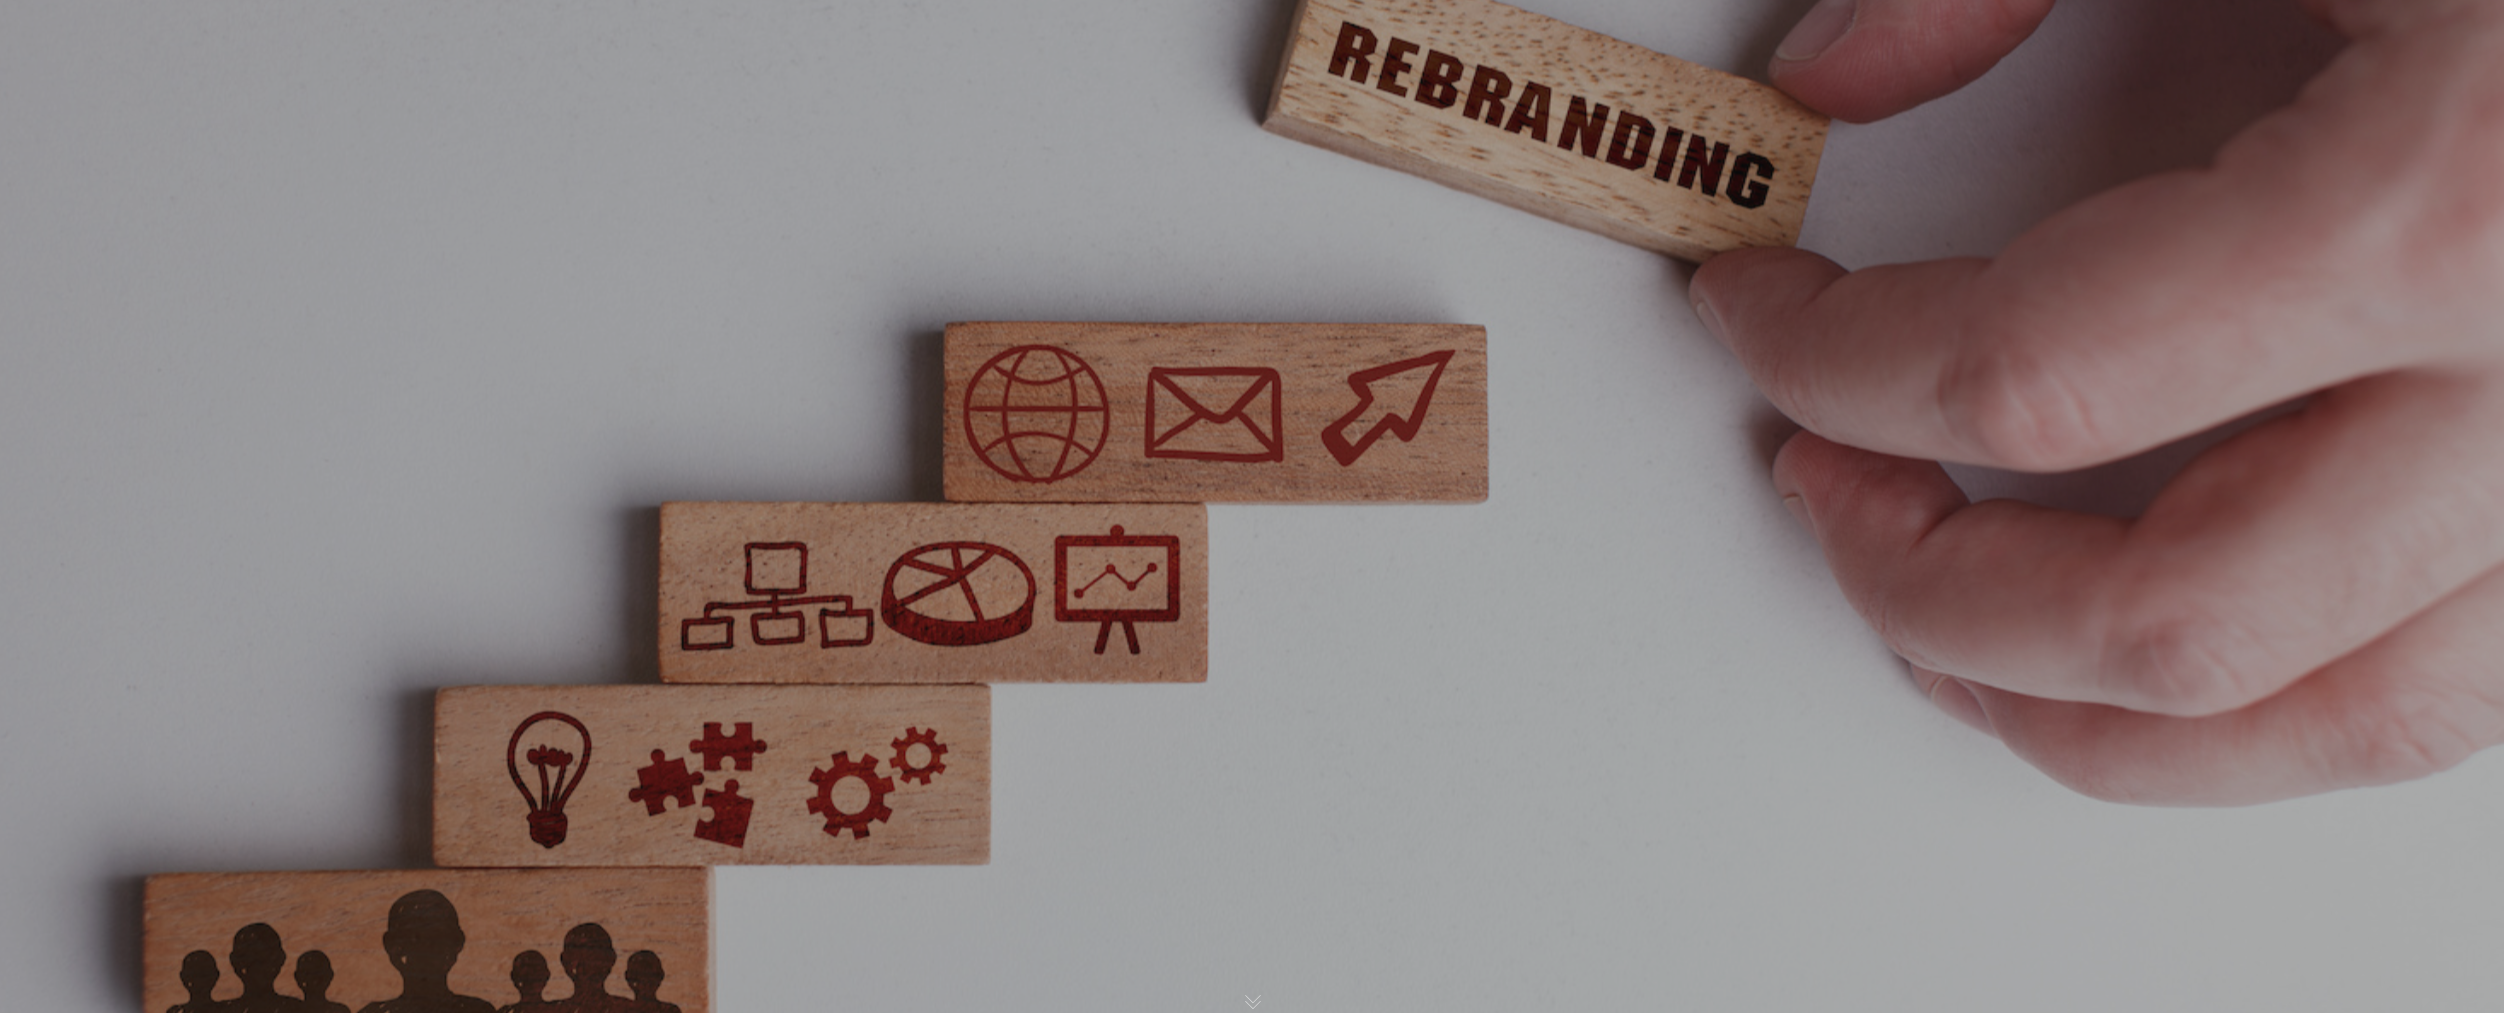 5 Steps for Successfully Rebranding Your Business (and 3 Common Mistakes to Avoid)